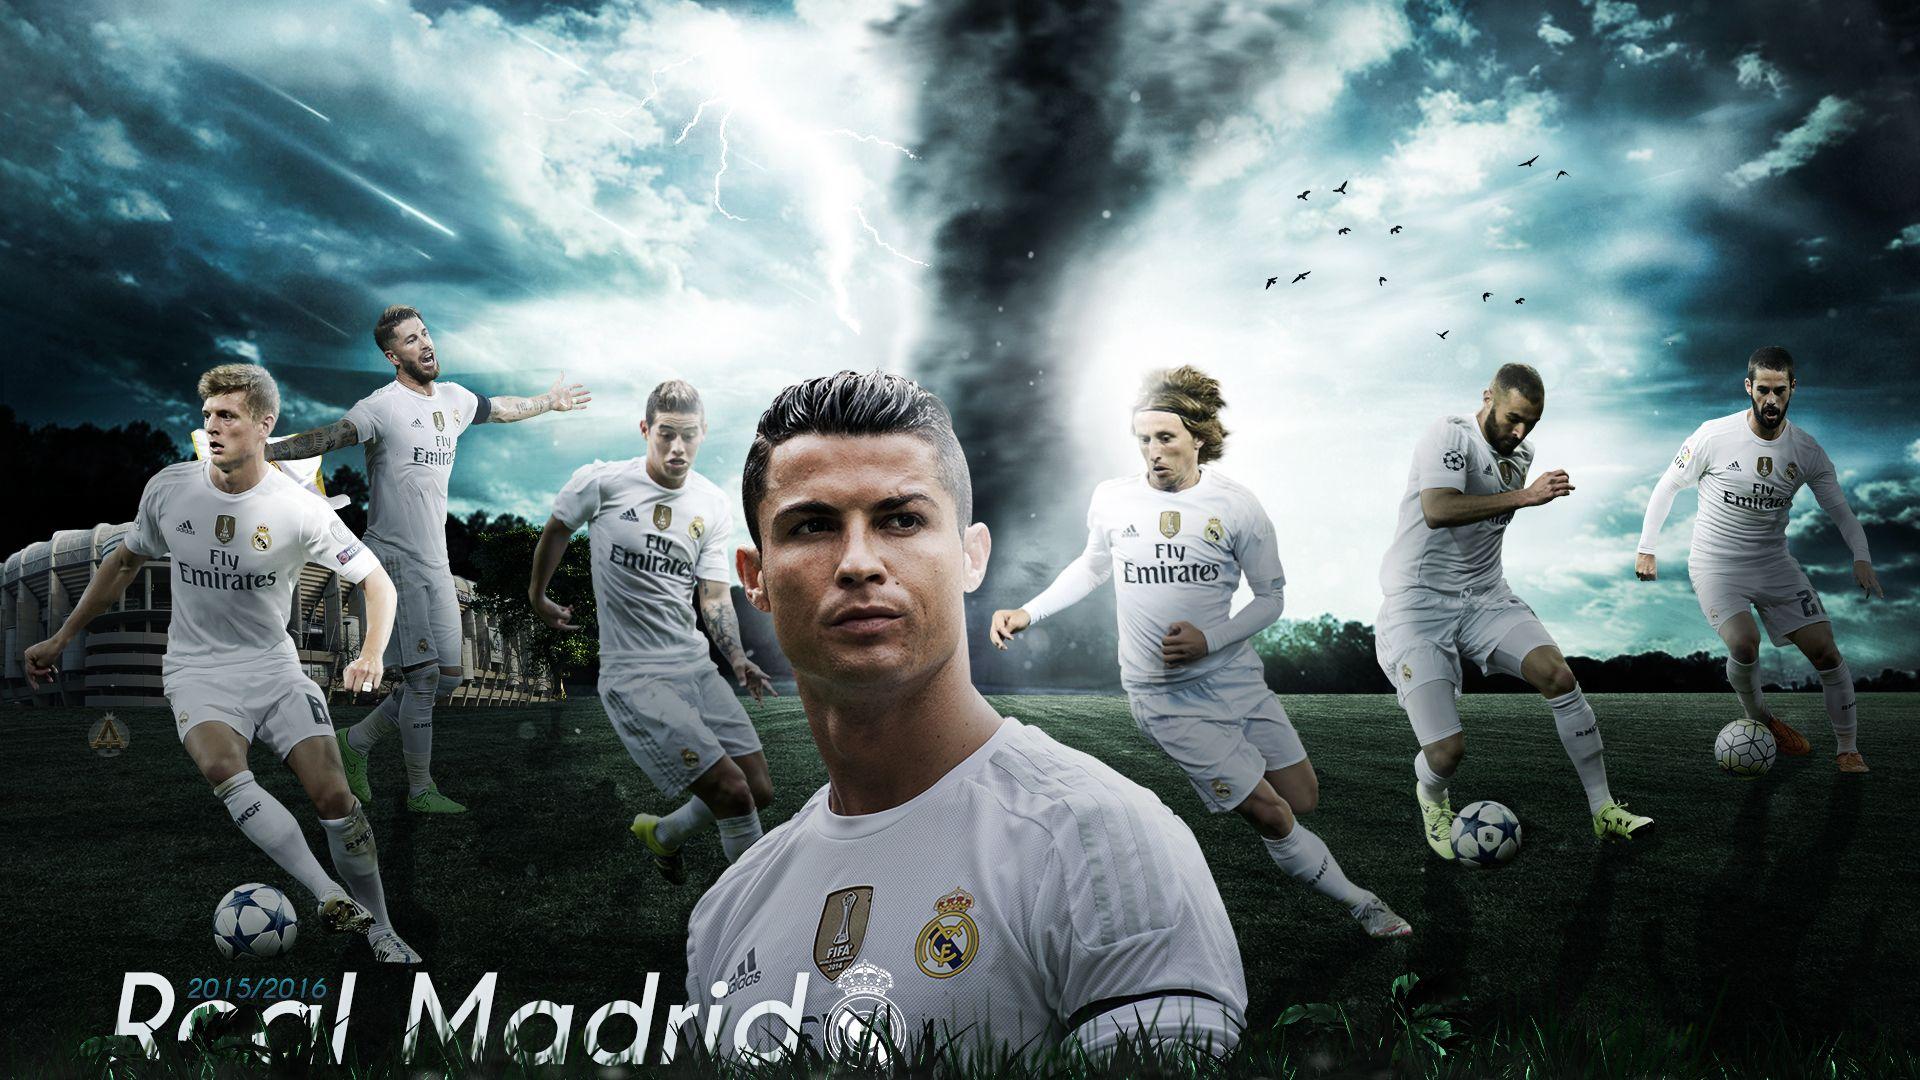 BBC Real Madrid Wallpapers - Wallpaper Cave